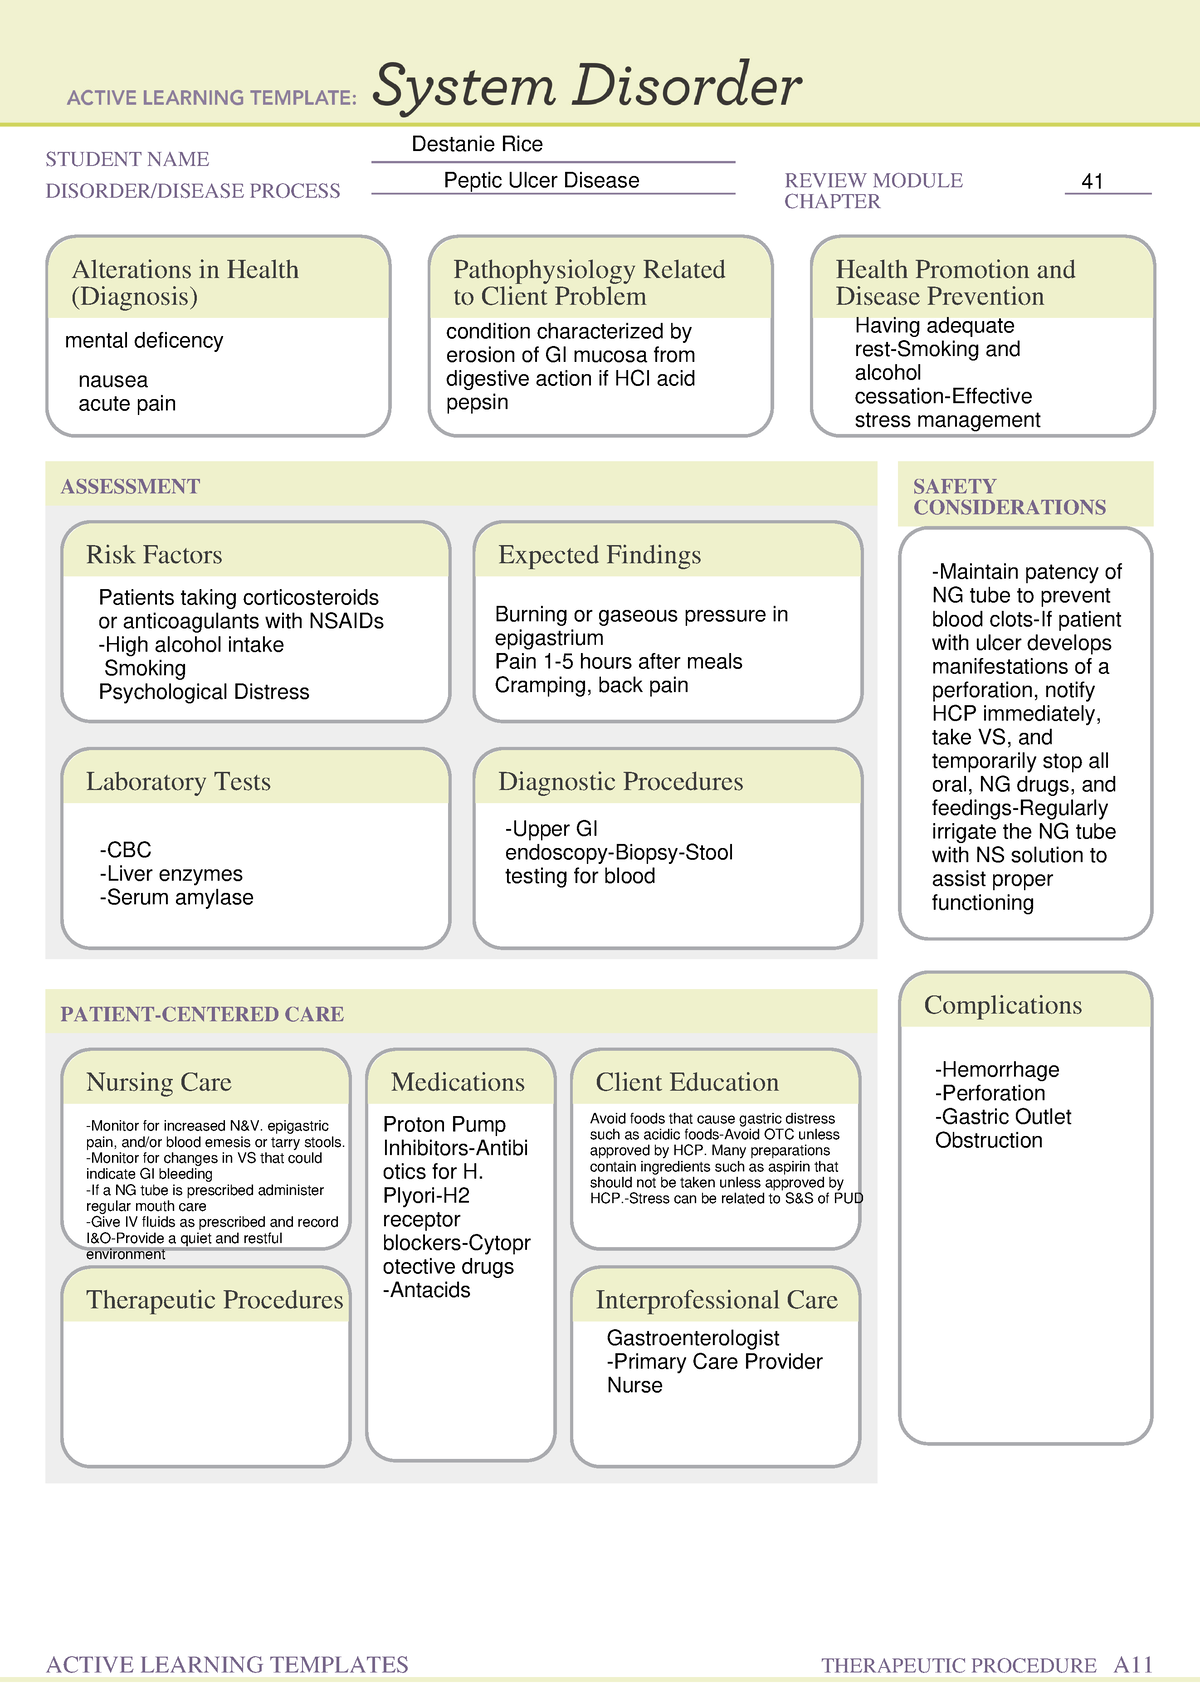 peptic-ulcer-disease-alt-system-disorder-nrs-2233-student-name-disorder-disease-process